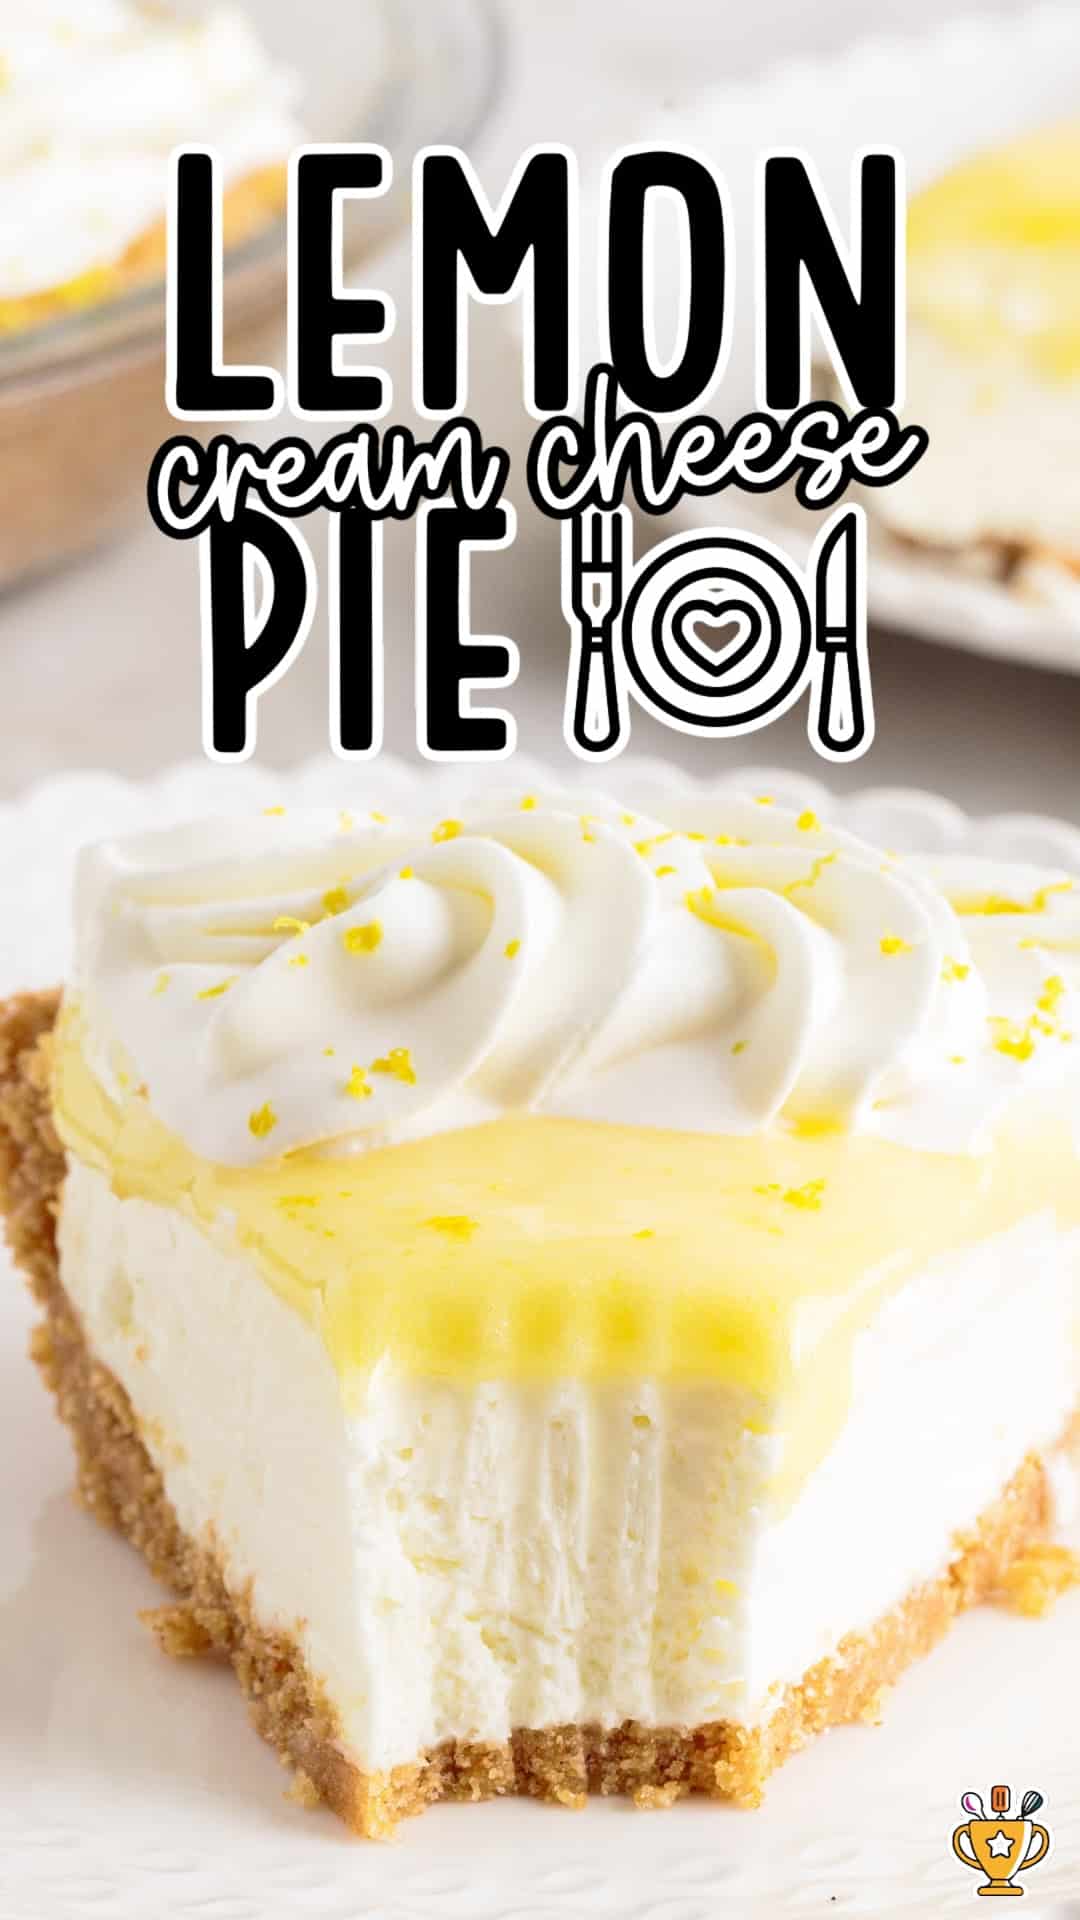 slice of lemon cream cheese pie with a bite taken out of it